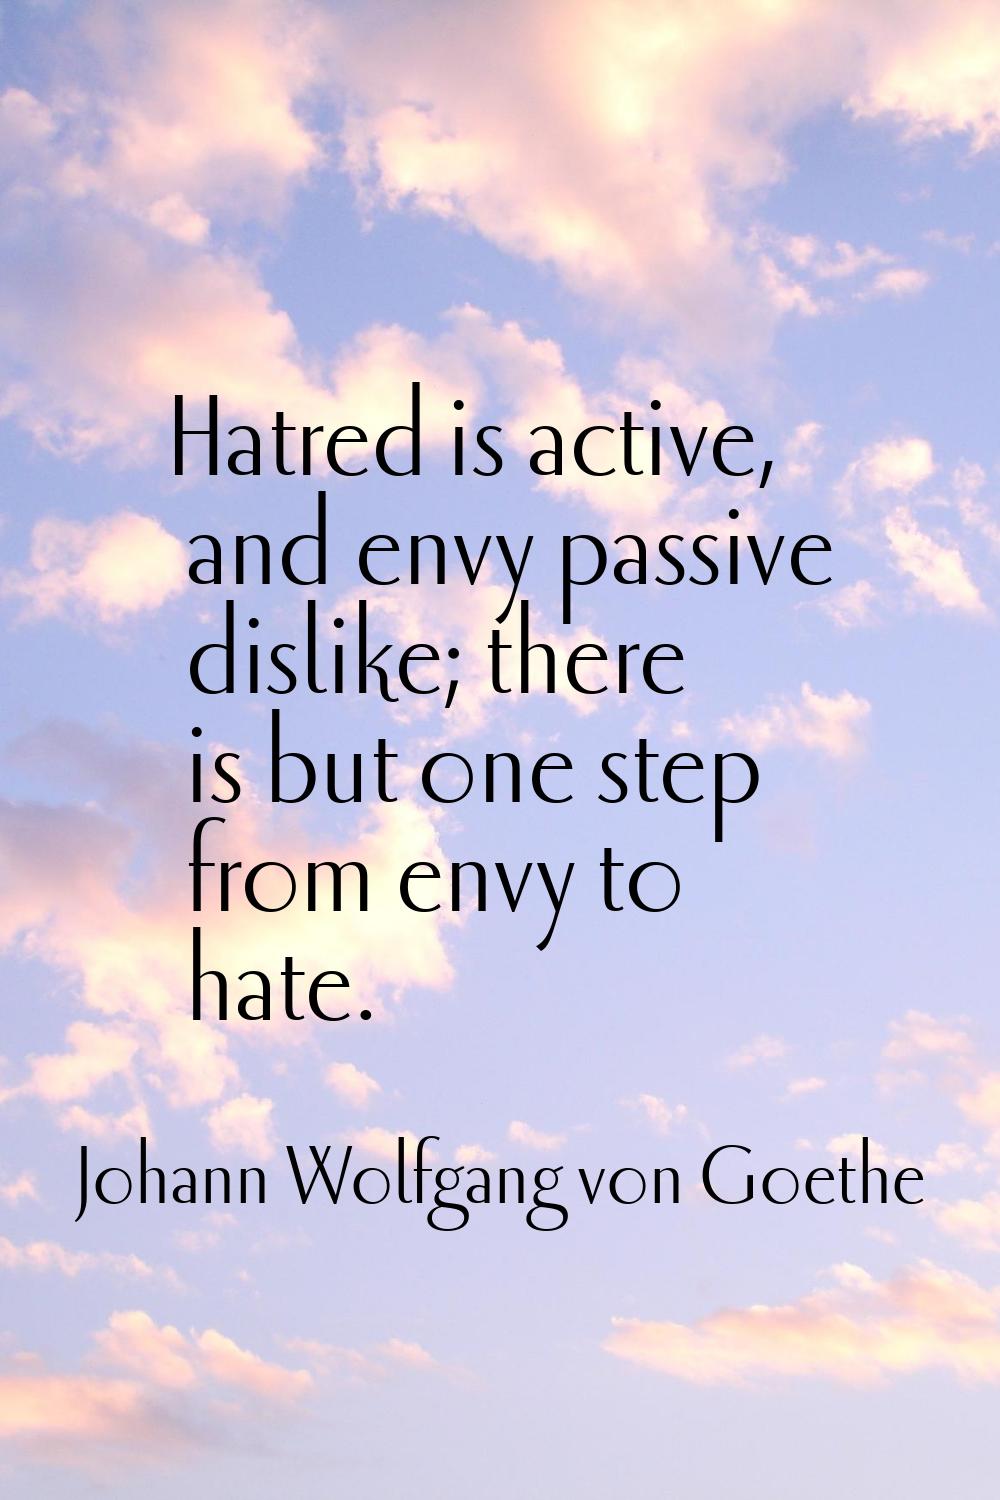 Hatred is active, and envy passive dislike; there is but one step from envy to hate.